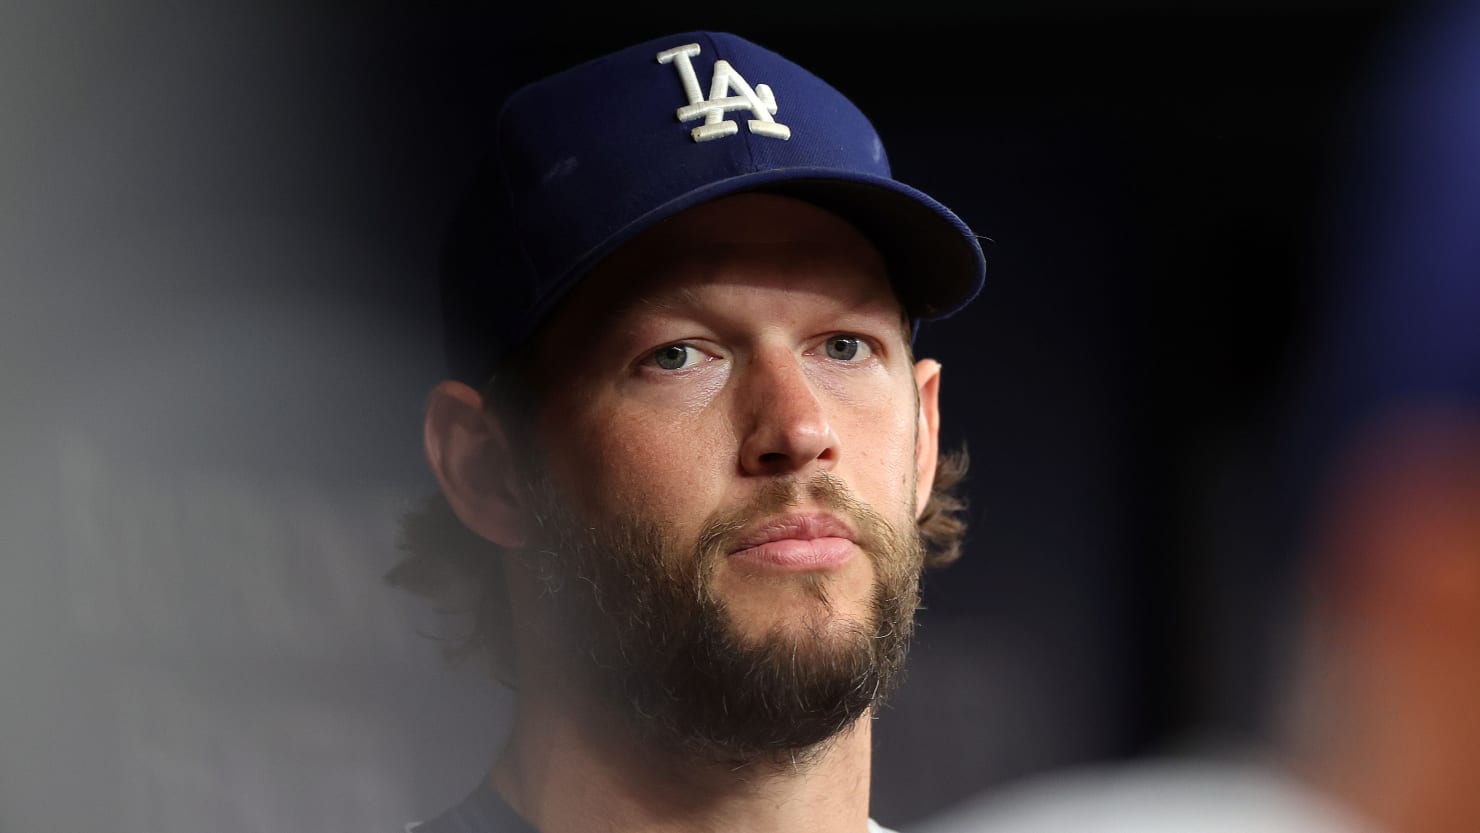 Clayton Kershaw pushed for Dodgers to announce Christian night in